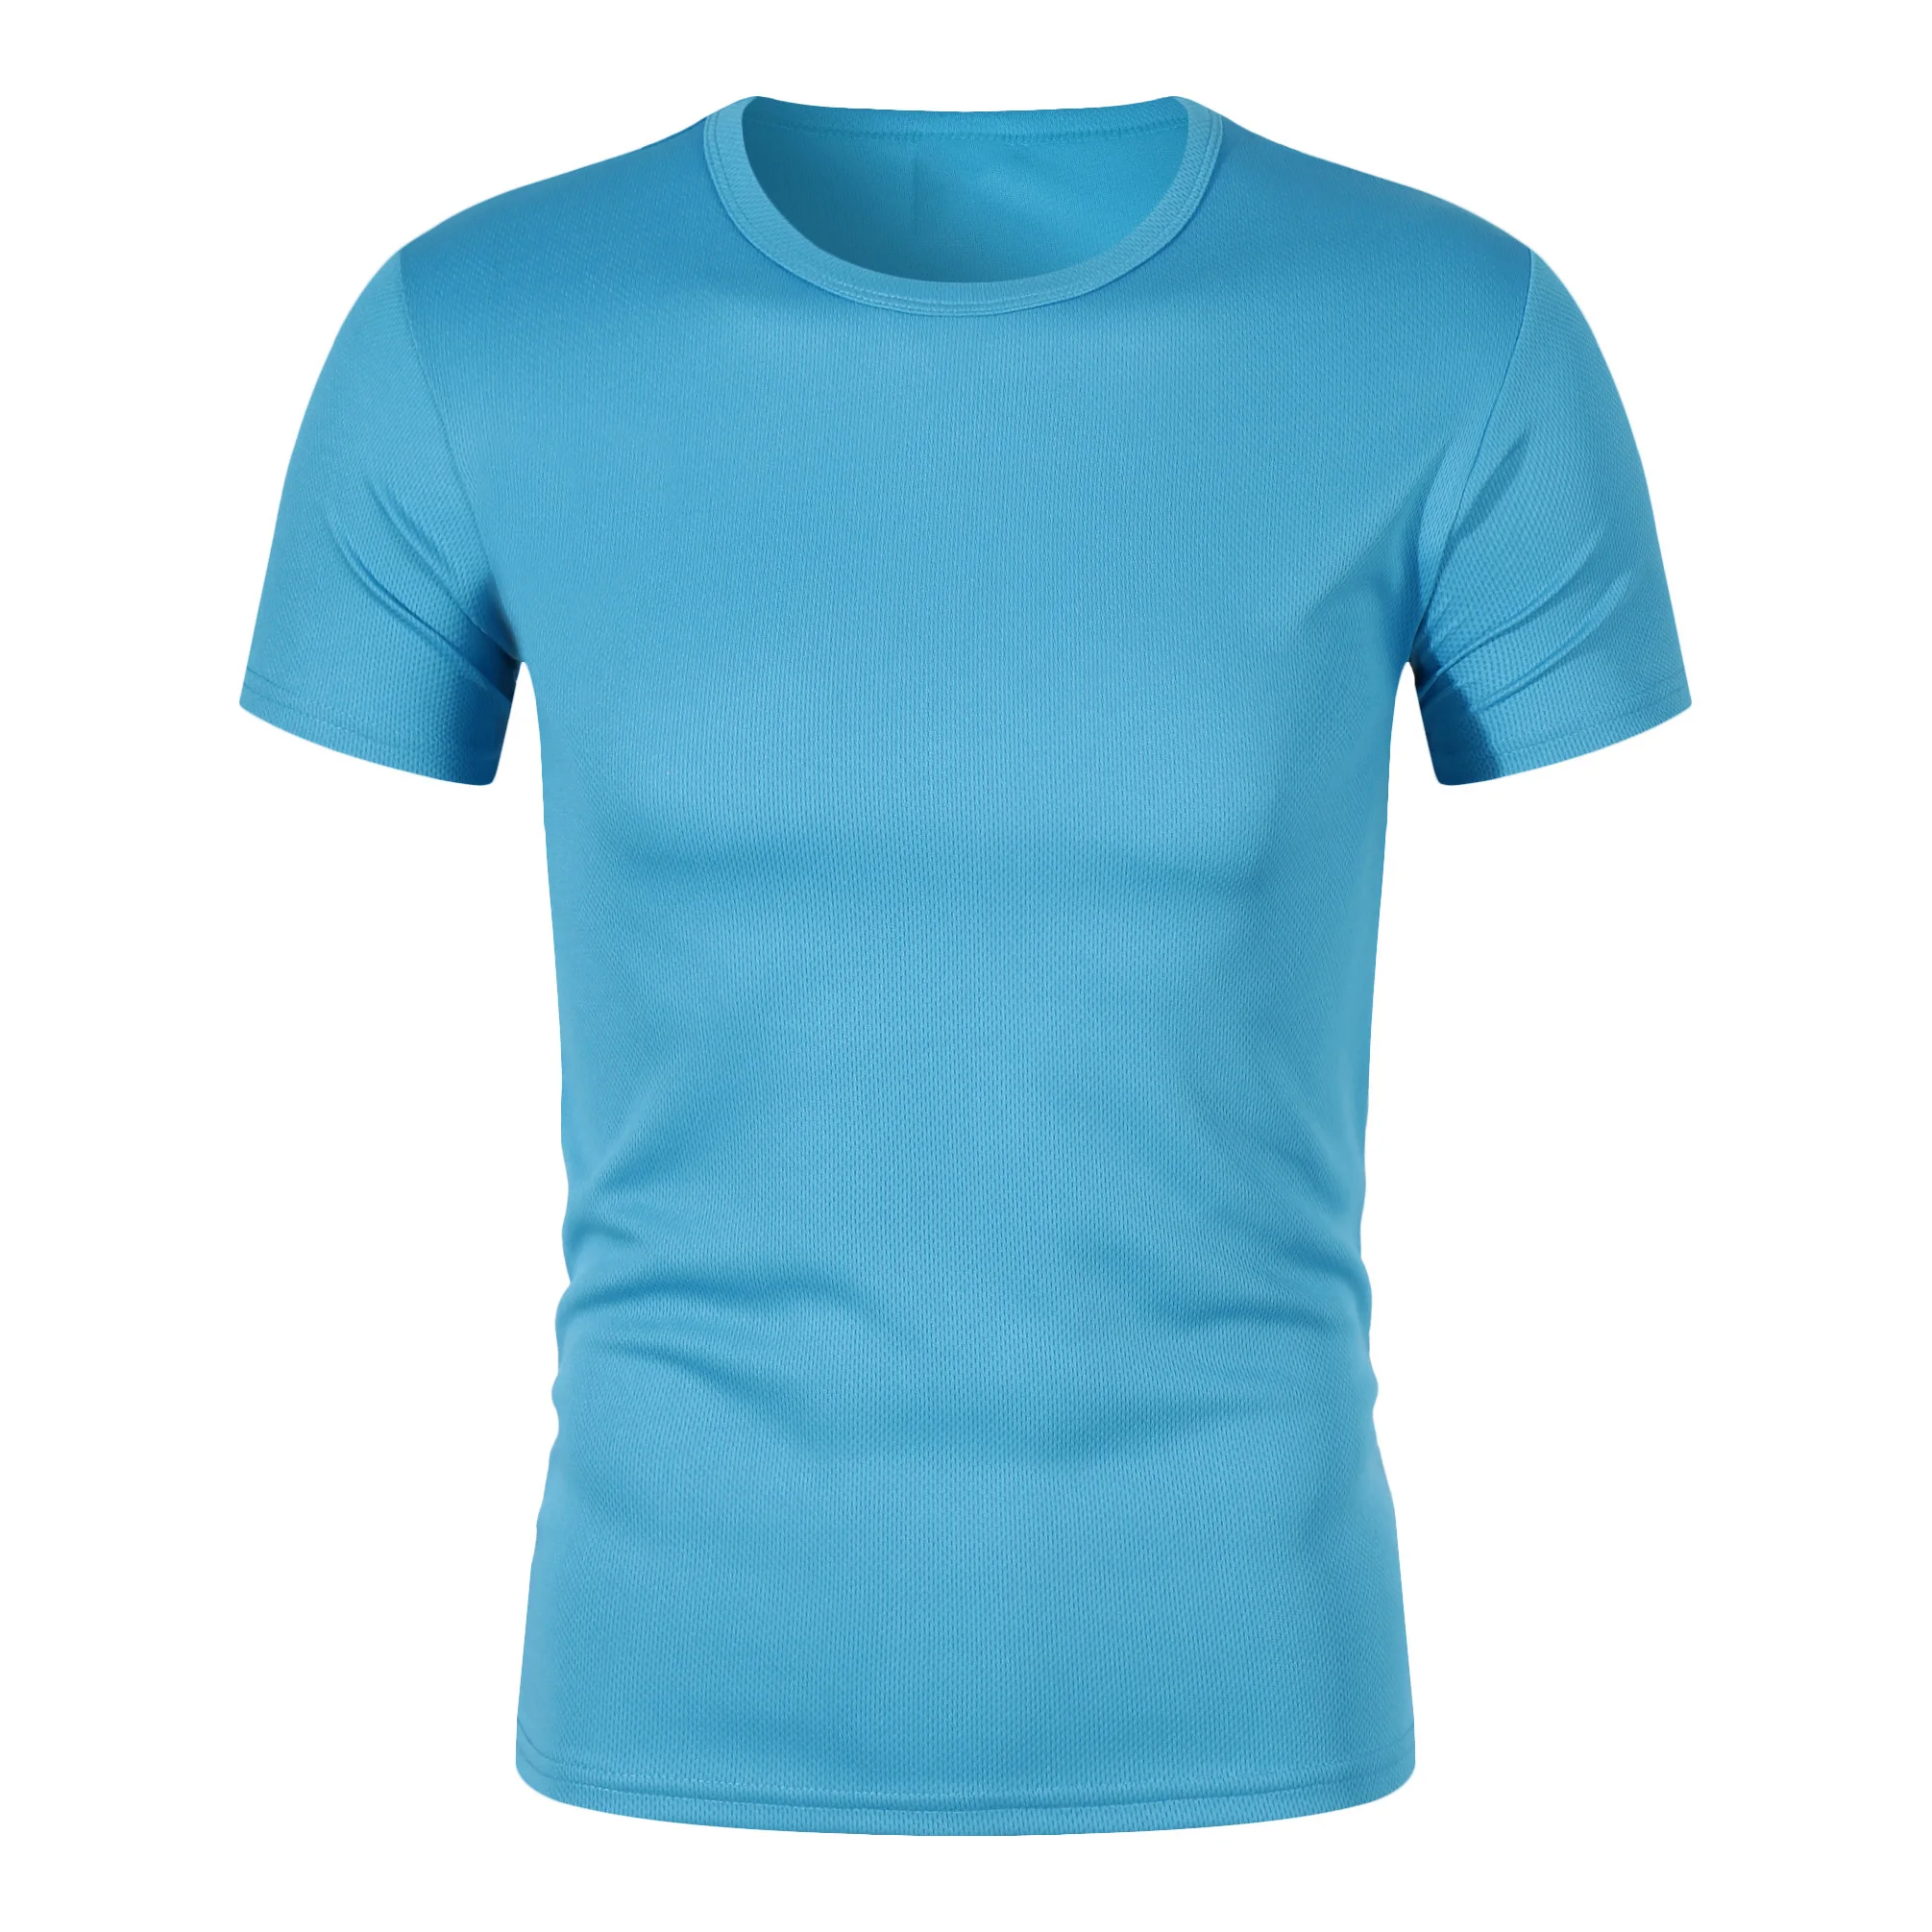 behang matchmaker Wees tevreden Breathable Soft And Comfortable Dry Fit Polyester Bird Eye Fabric Sport T  Shirt - Buy Bird Eye T Shirt,Polyester Shirt,Dry Fit Sport Shirt Product on  Alibaba.com